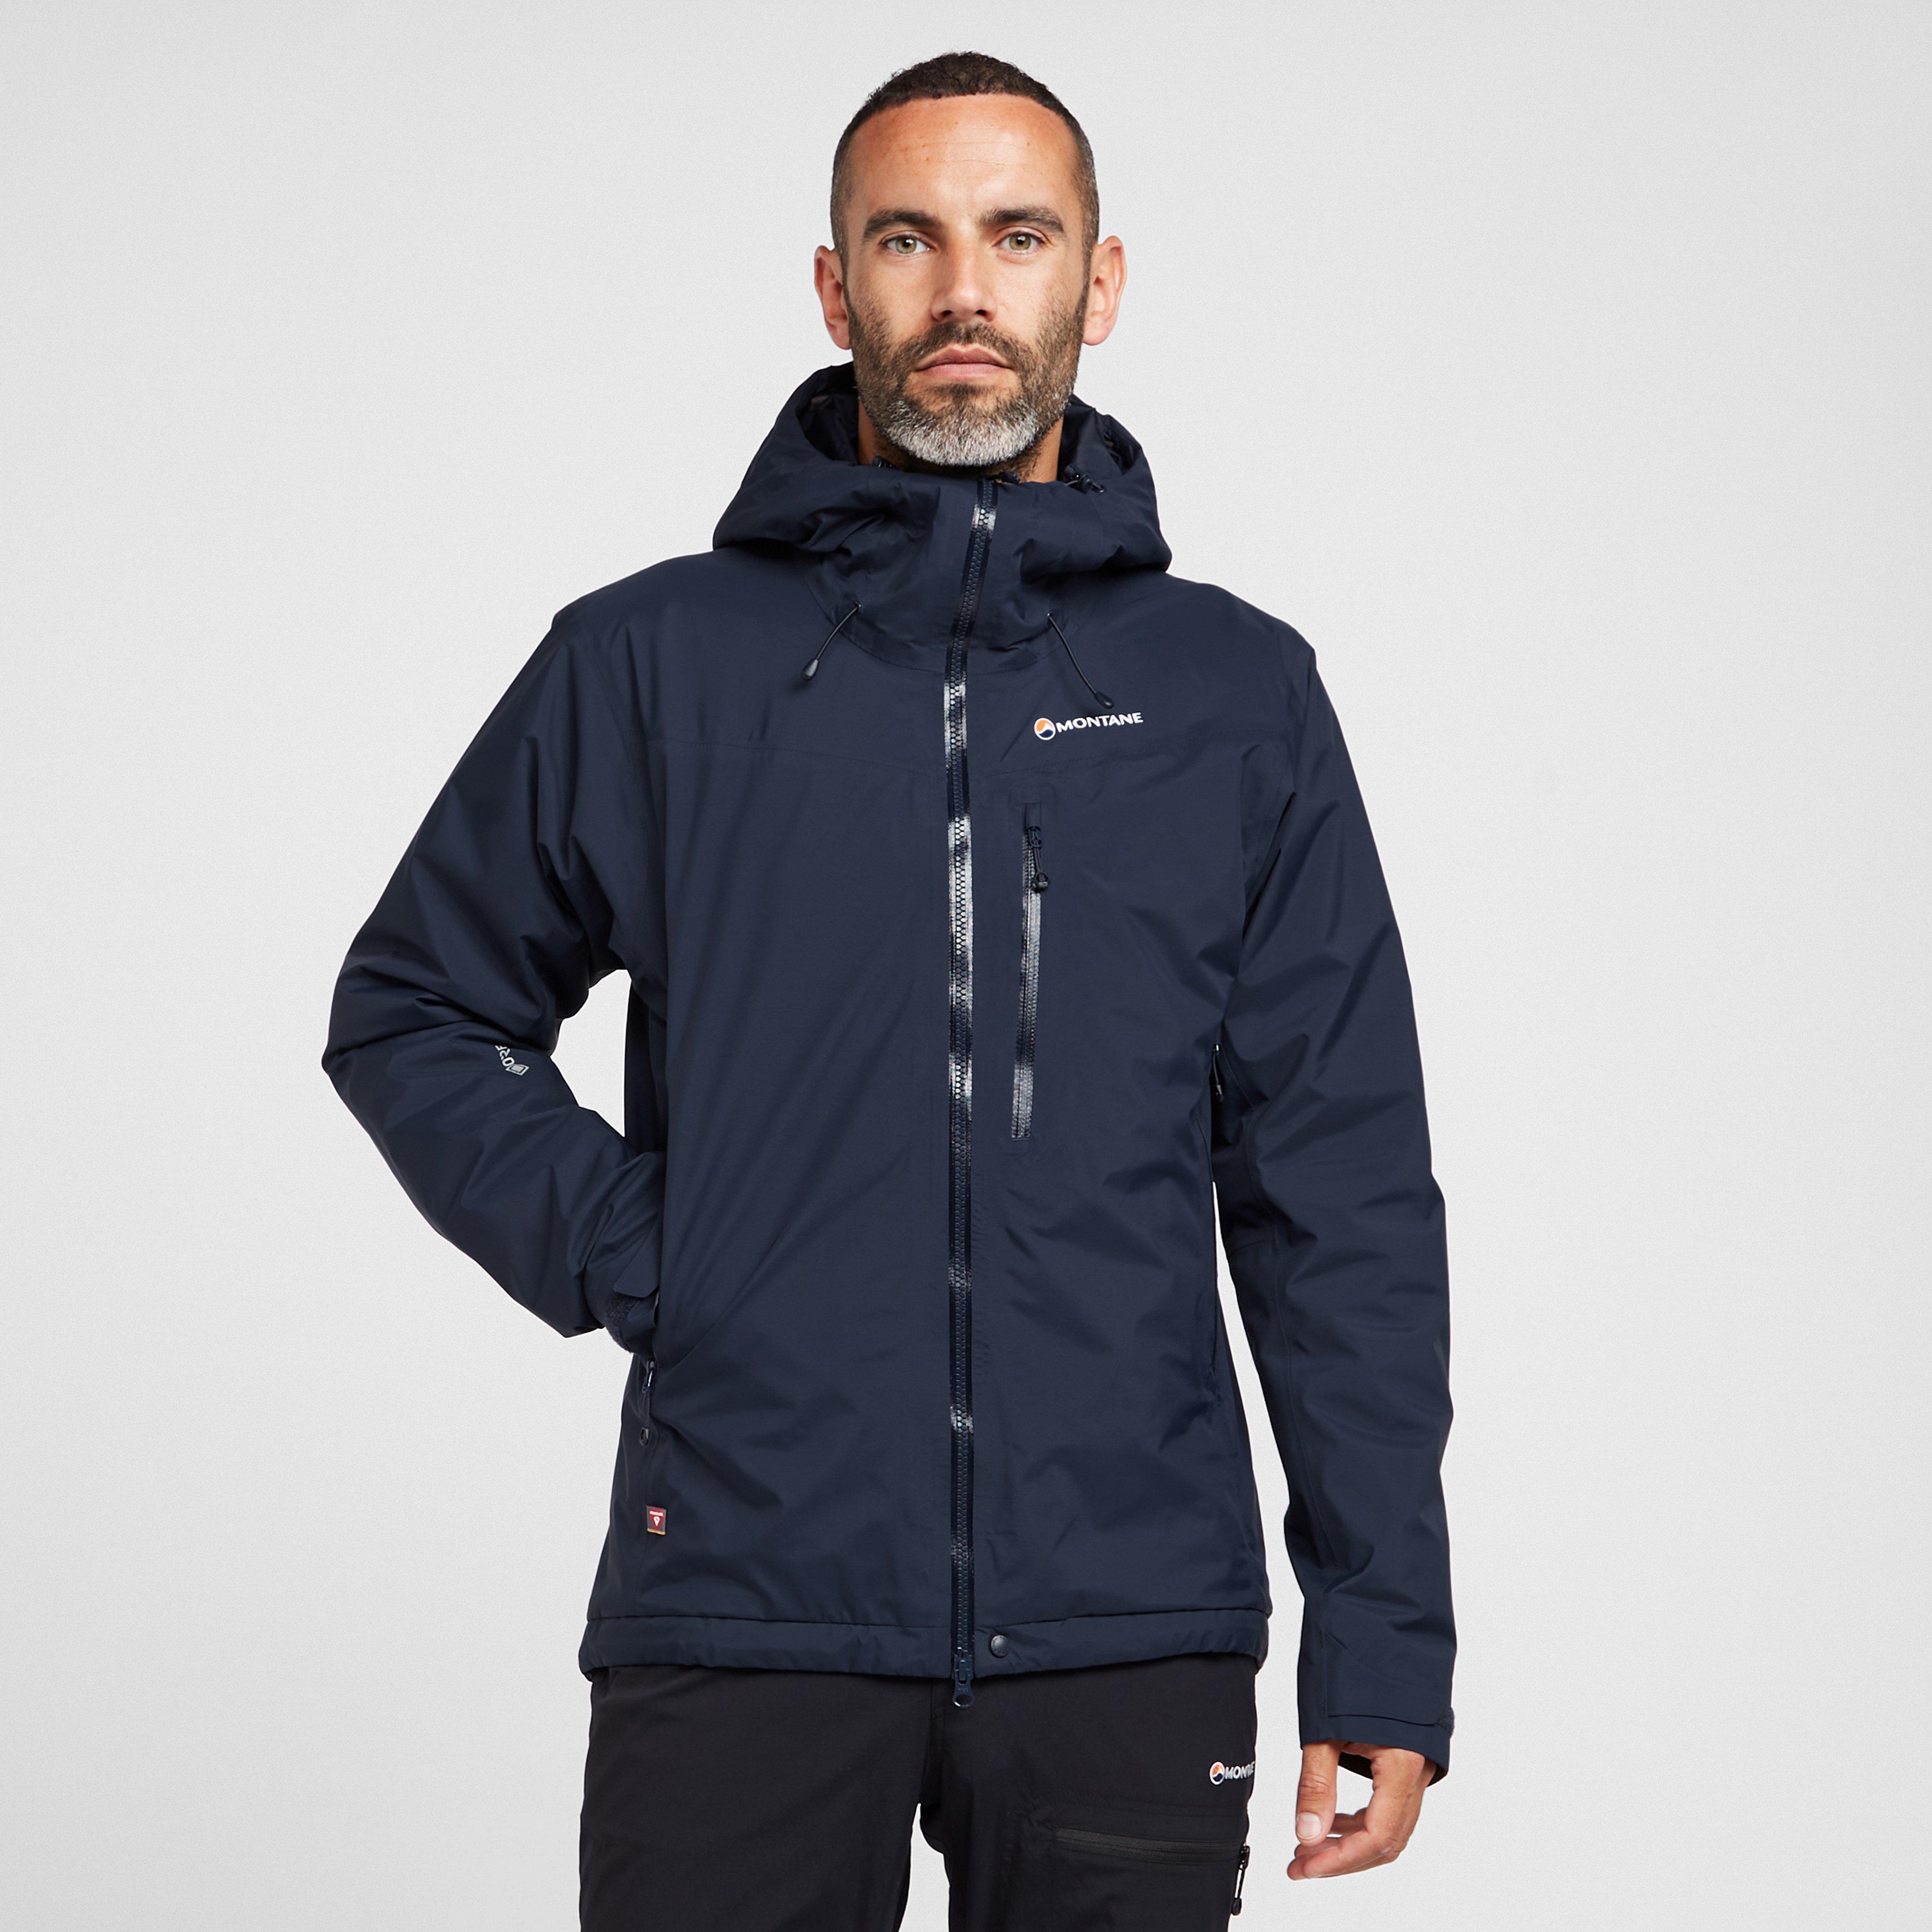 montane men's insulated duality jacket - navy, navy